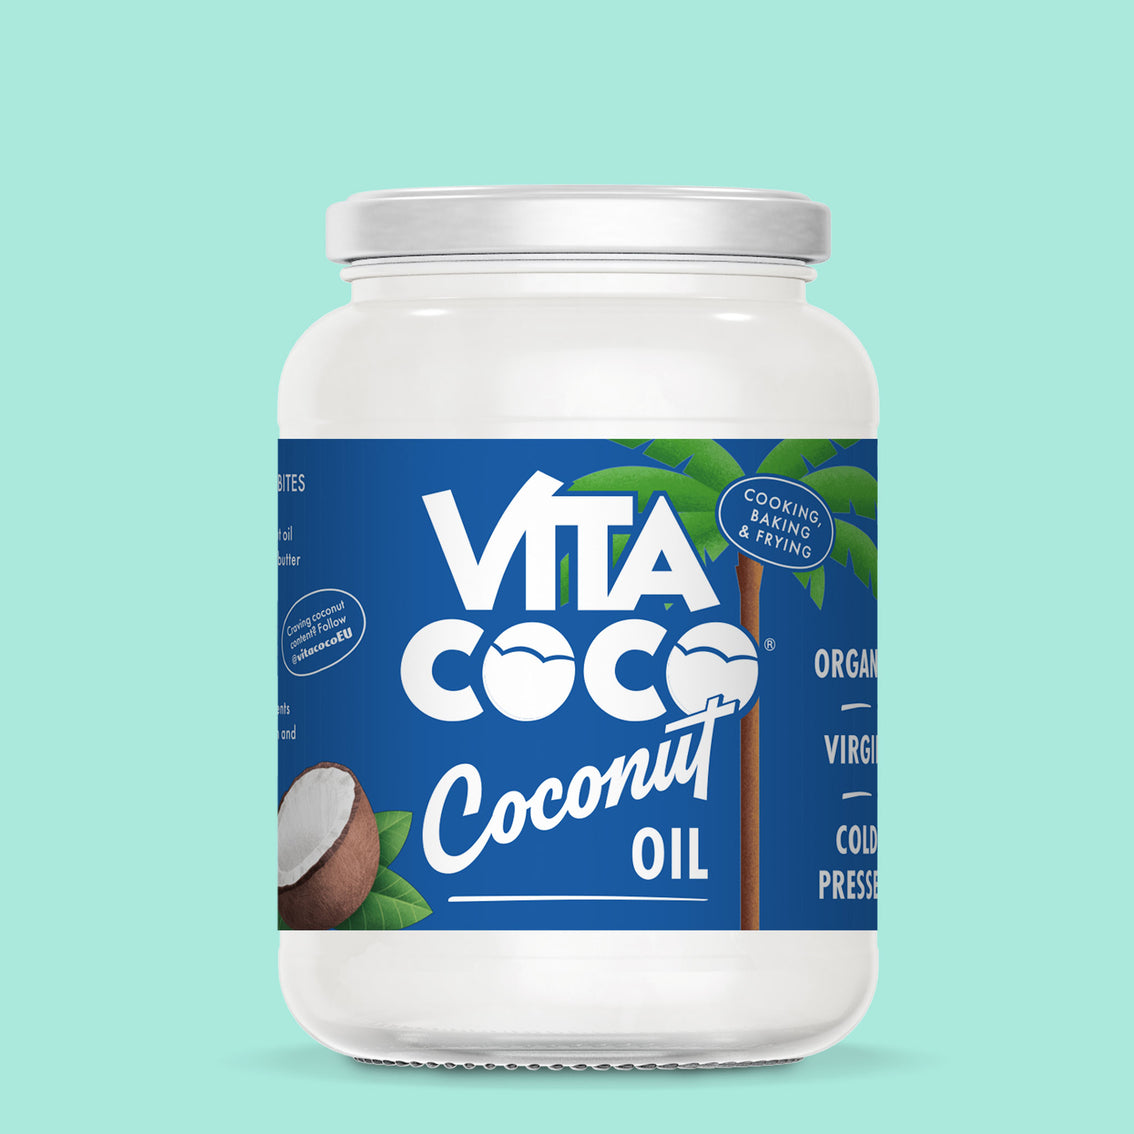 Vita Coco Coconut oil in a clear jar with a blue label